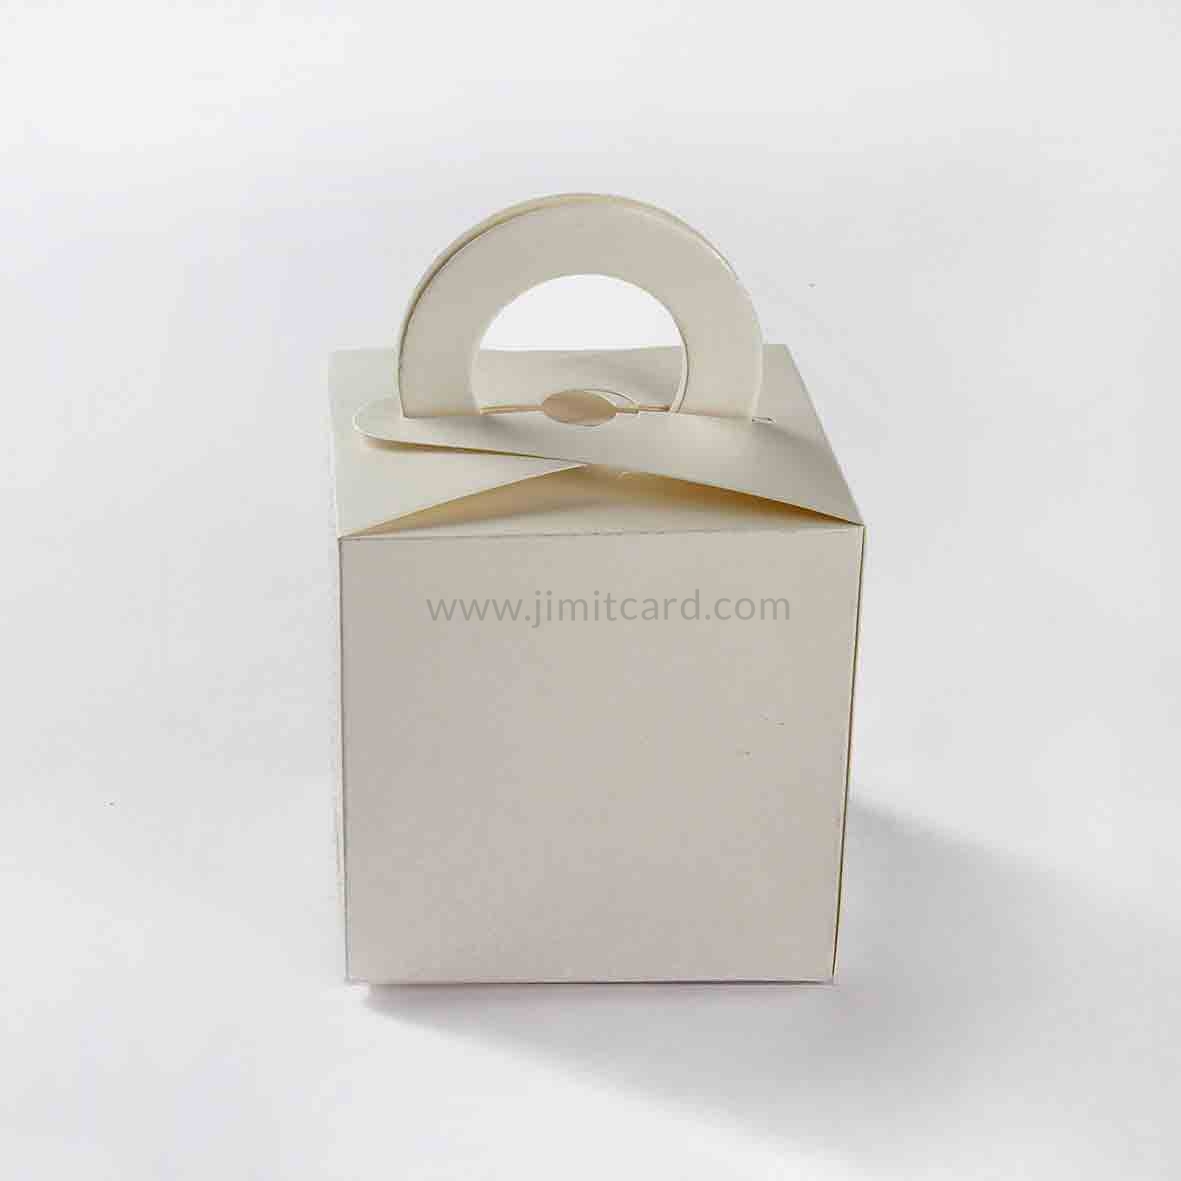 Square Wedding Party Favor Box in White Color with a Holder